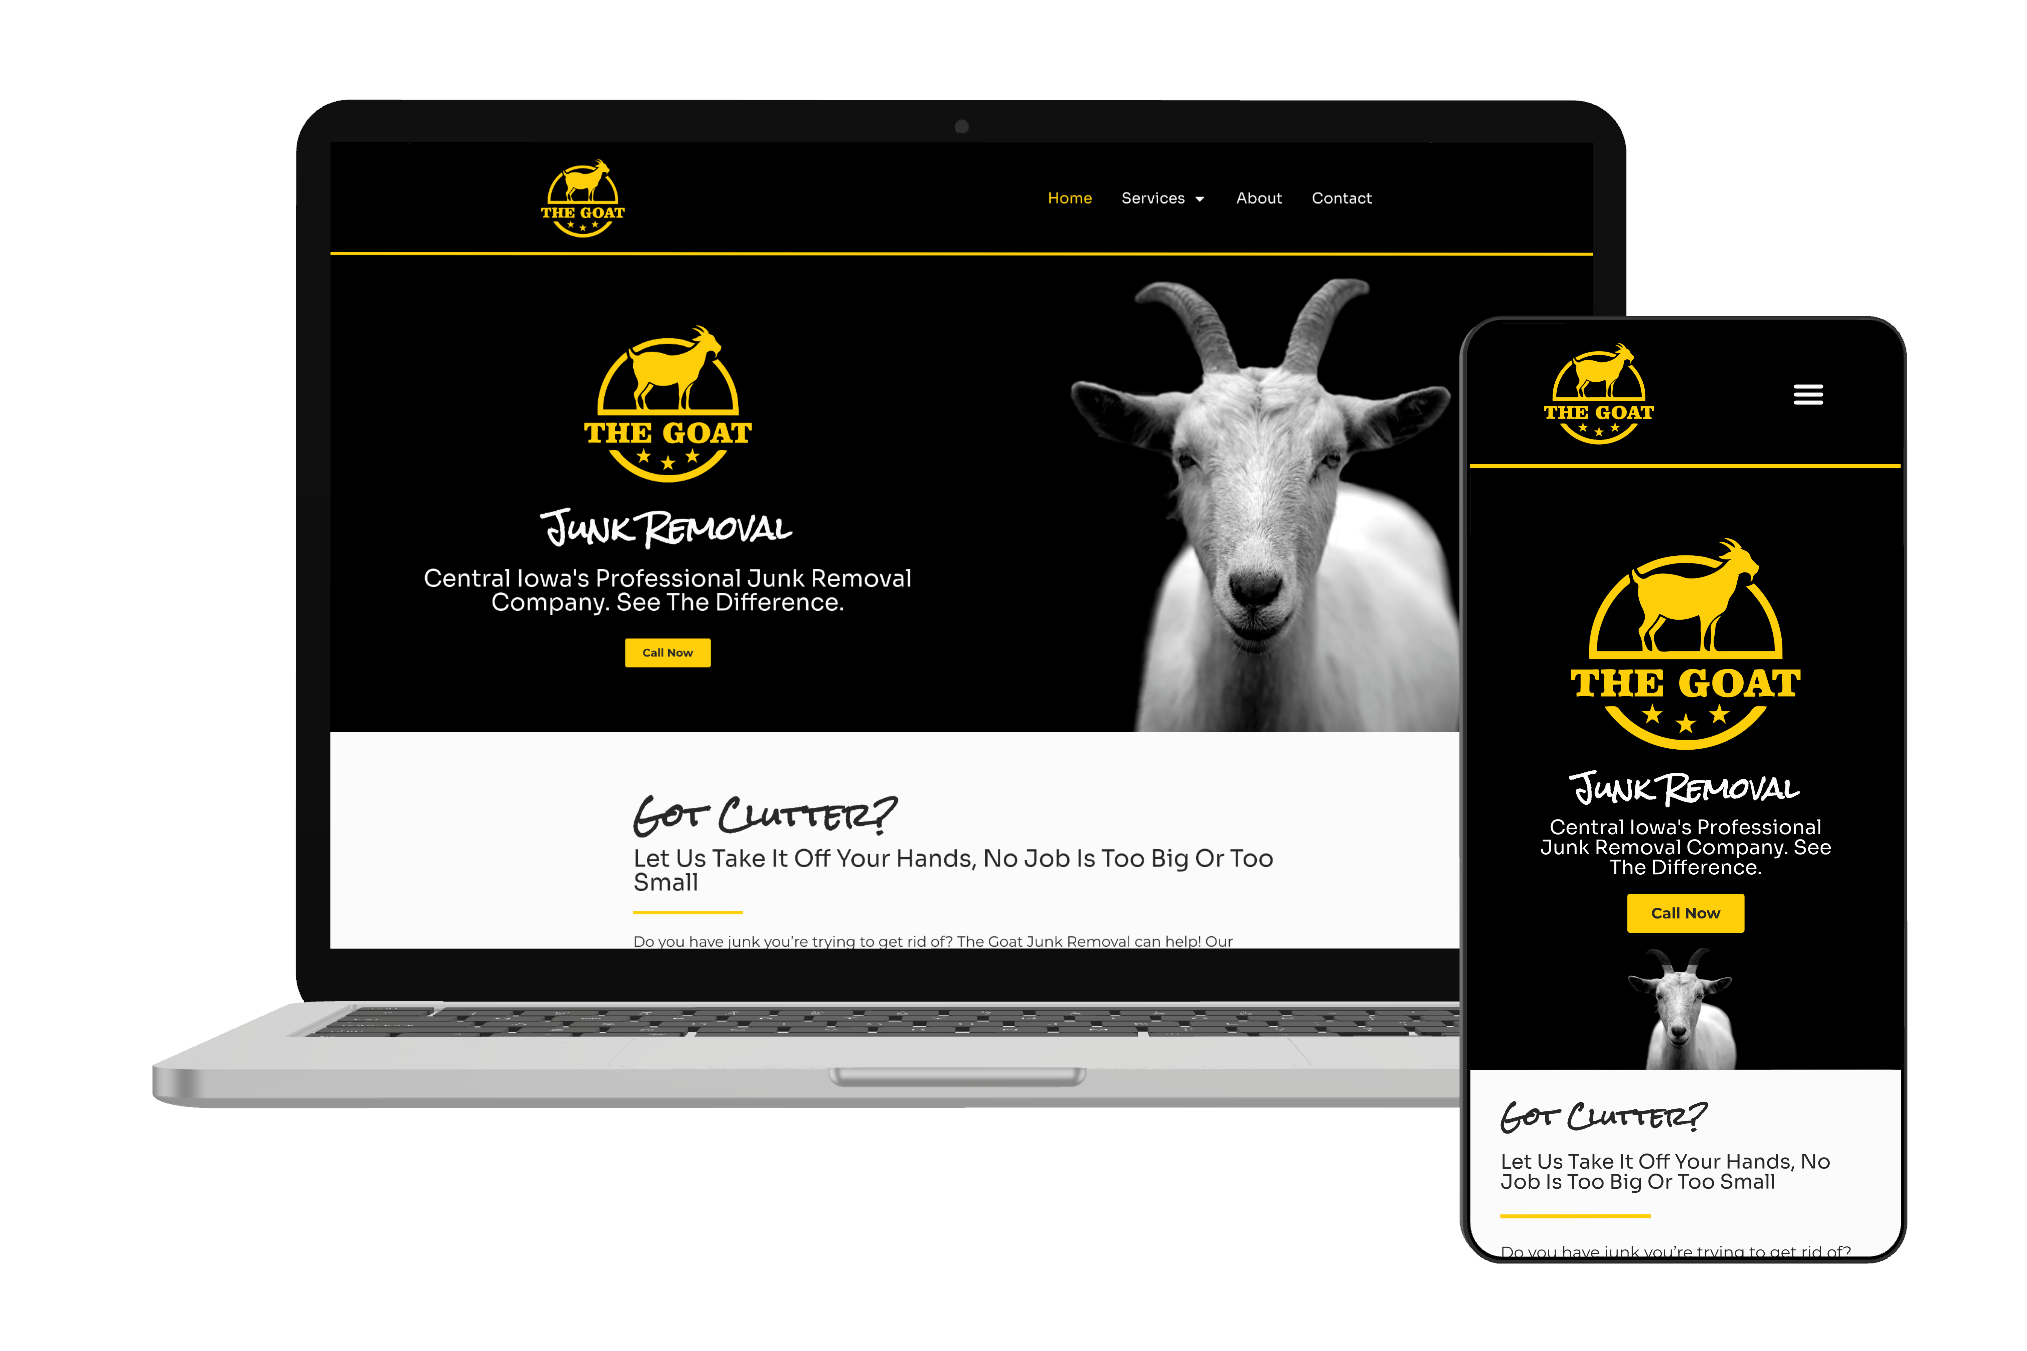 Visual mockup of The Goat website rendered on a laptop and smartphone.